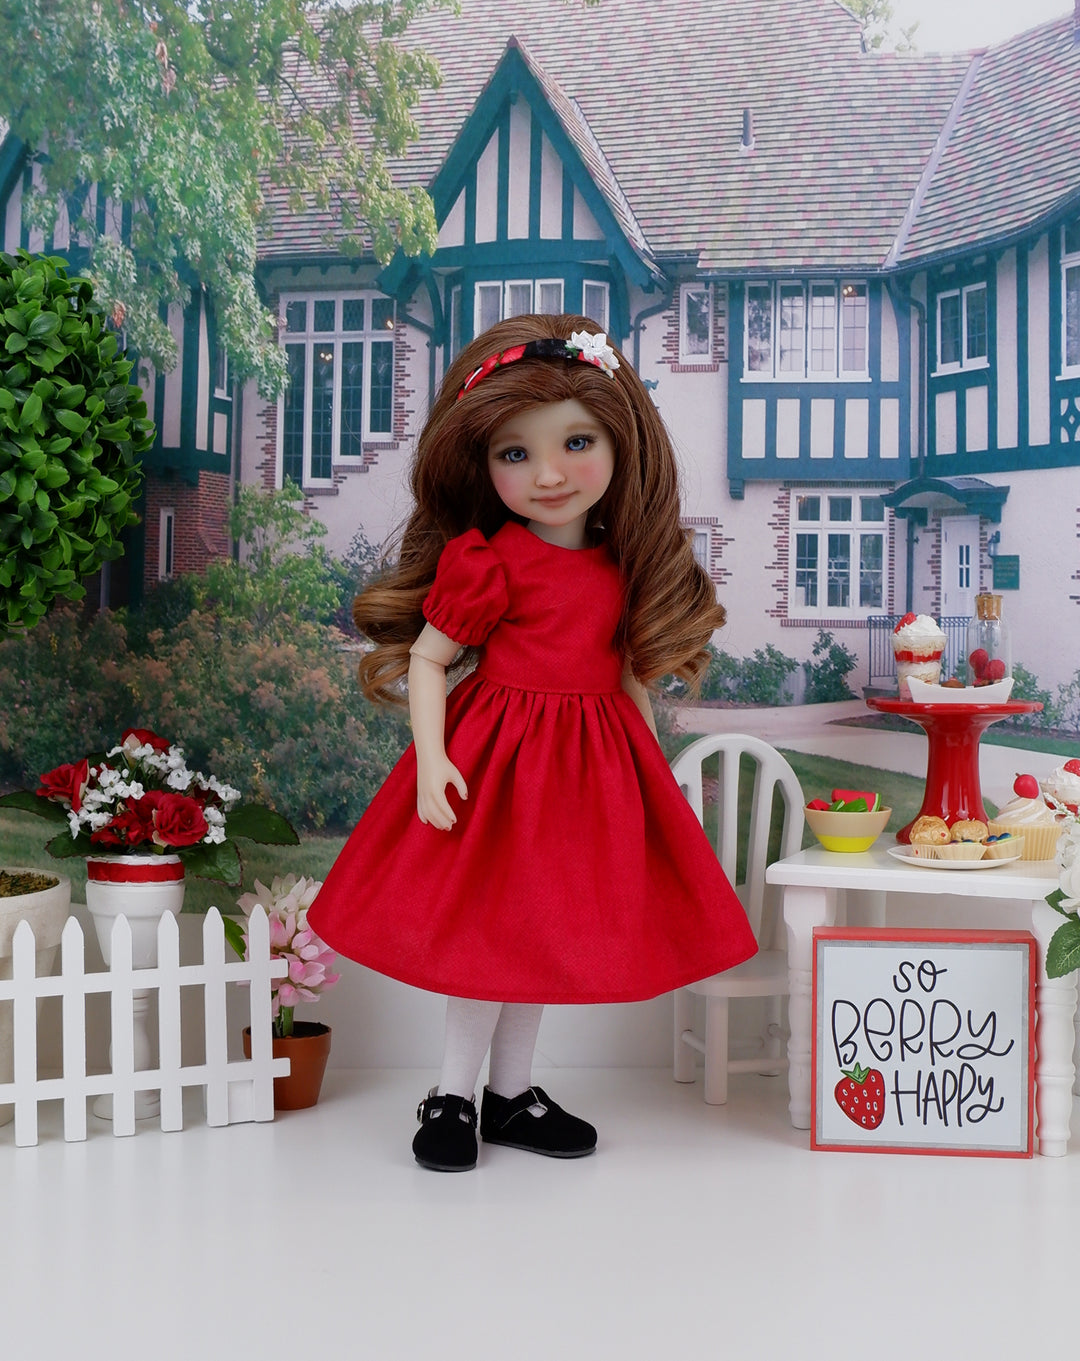 Strawberry Jam - dress & apron with shoes for Ruby Red Fashion Friends doll